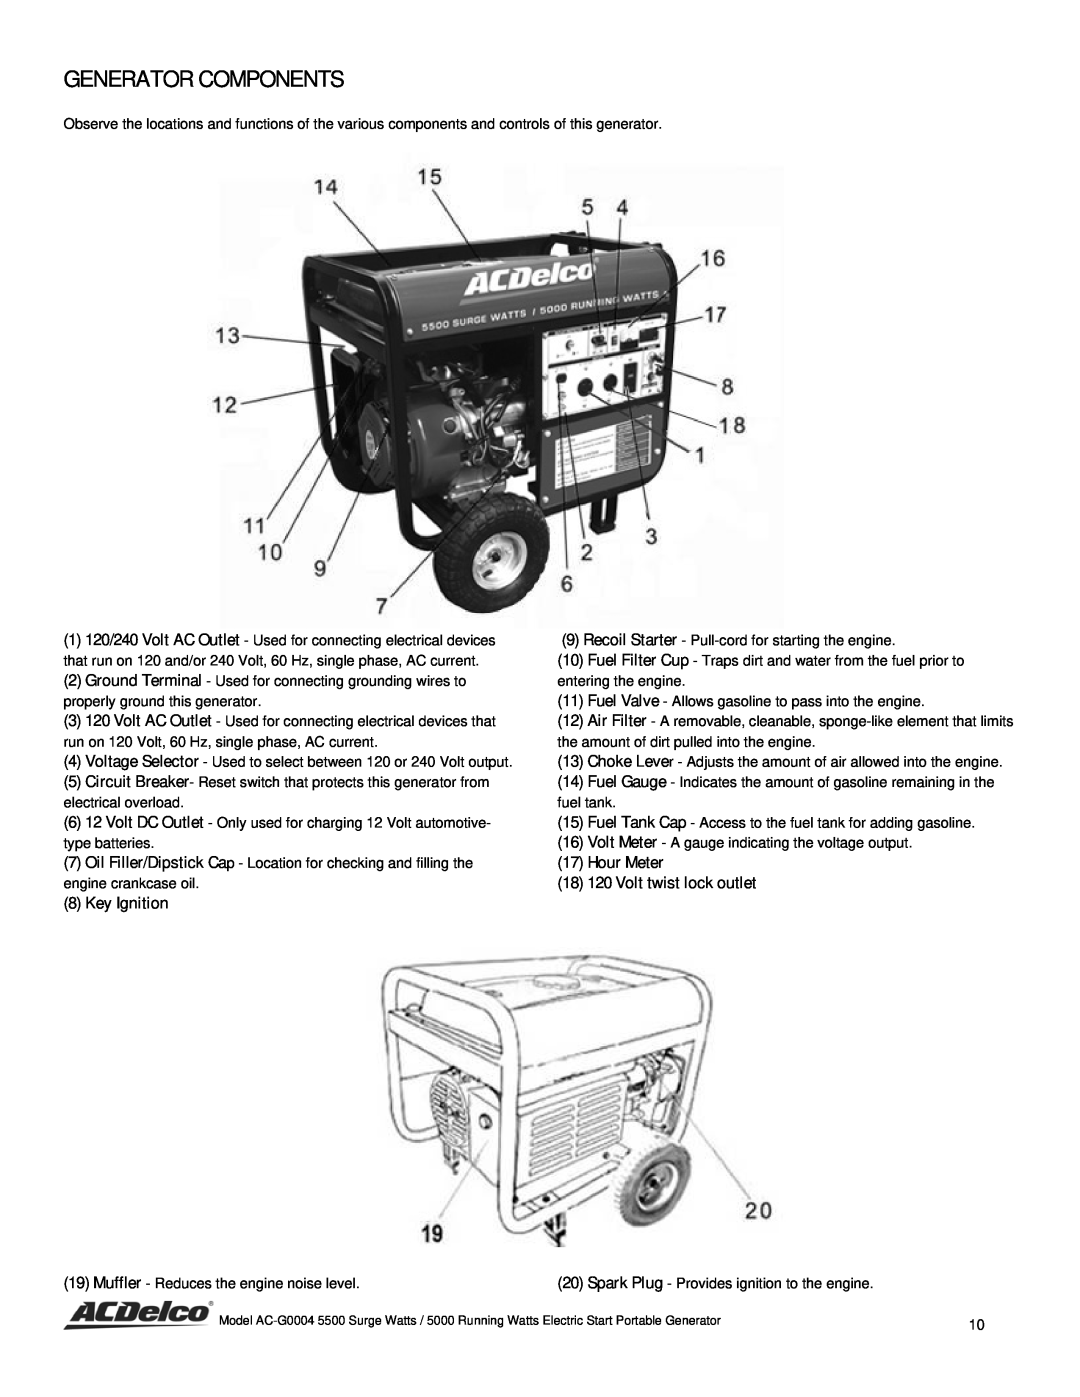 ACDelco AC-G0004 instruction manual Generator Components, Key Ignition, Hour Meter 18 120 Volt twist lock outlet 